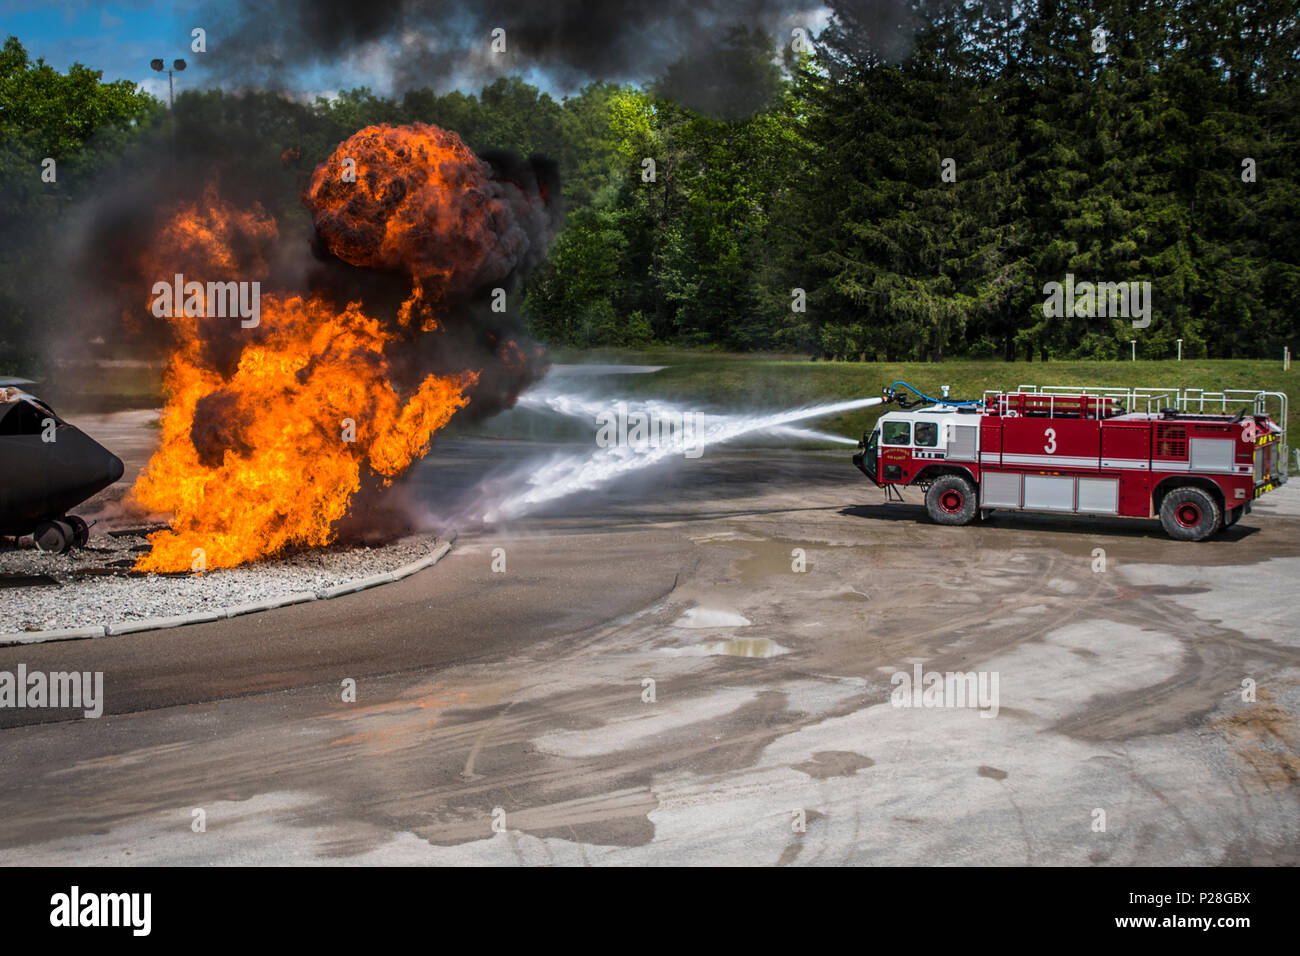 Airmen from the 179th Airlift Wing Fire Department, Mansfield, Ohio, conduct aircraft crash recovery training, June 4, 2018, held at the Alpena Combat Readiness Traning Center, Alpena, Michigan. Airmen use fire trucks to circle the simulated aircraft crash site and extinguish the flames created by a controlled propane live fire system. The training is focused on full spectrum readiness preparing the wing to respond to local, state or federal activations at a moments notice. (U.S. Air National Guard photo by Capt. Paul Stennett/Released) Stock Photo